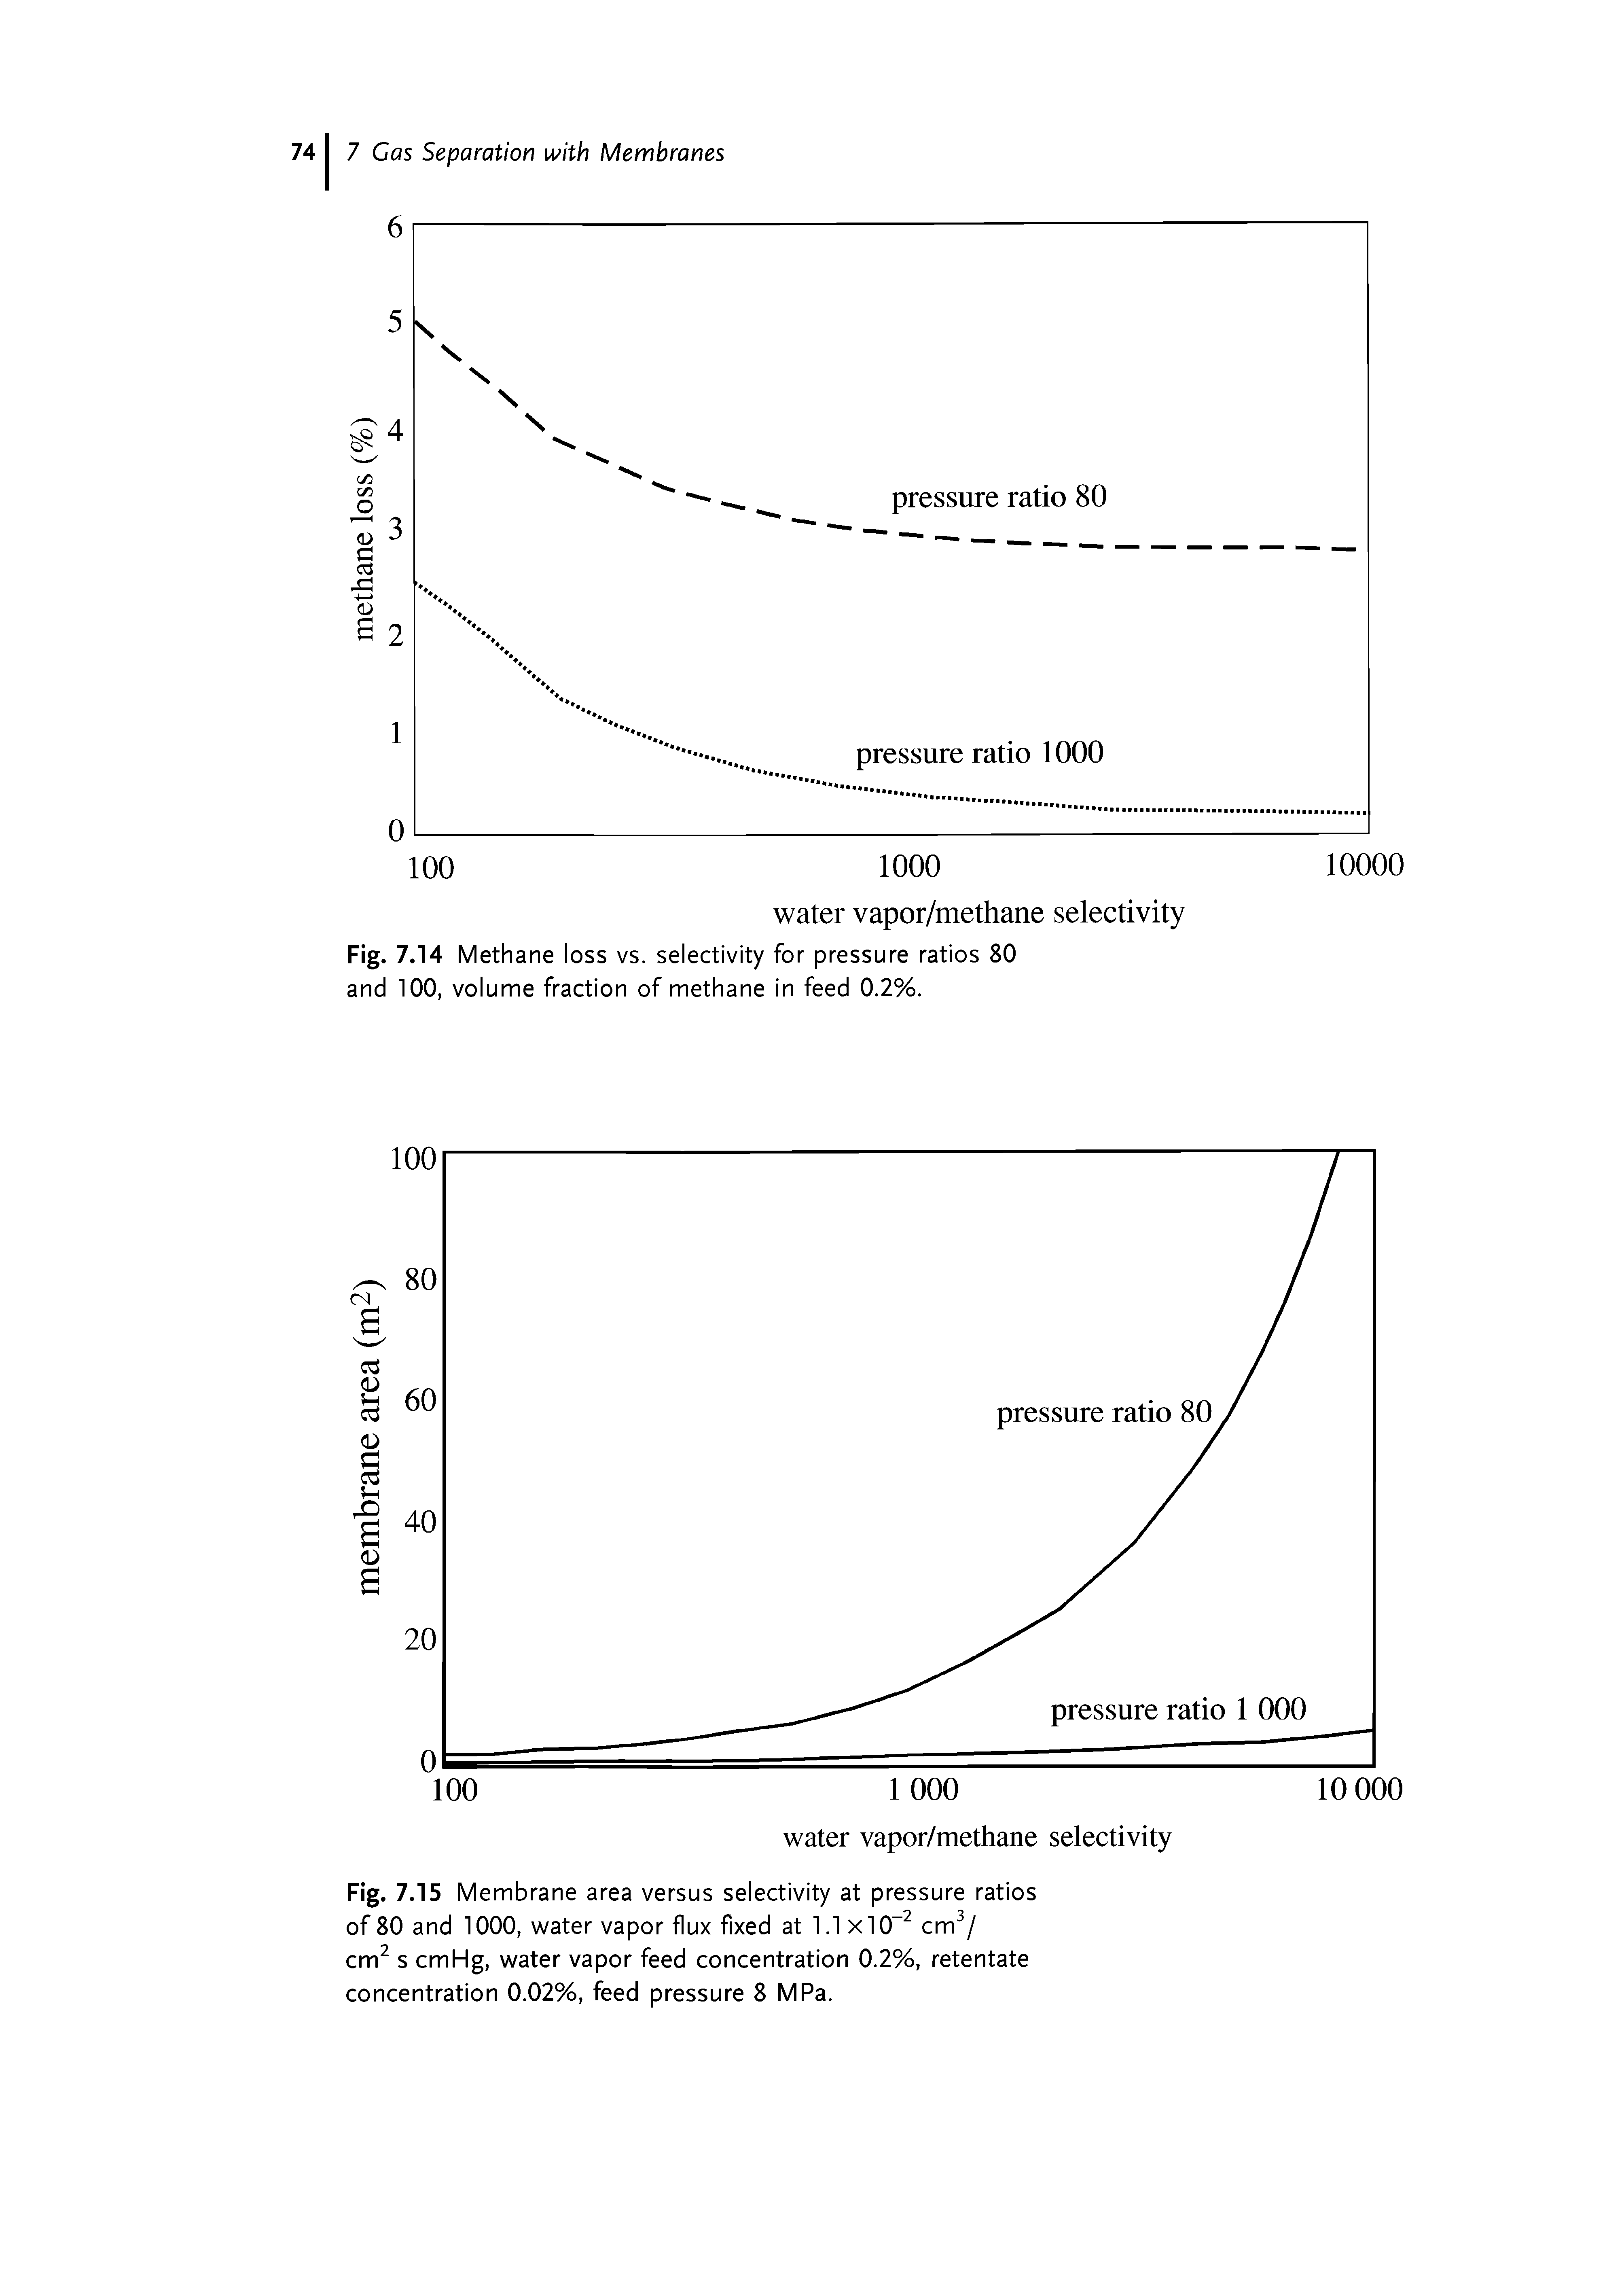 Fig. 7.15 Membrane area versus selectivity at pressure ratios of 80 and 1000, water vapor flux fixed at 1.1x10 cm / cm s cmHg, water vapor feed concentration 0.2%, retentate concentration 0.02%, feed pressure 8 MPa.